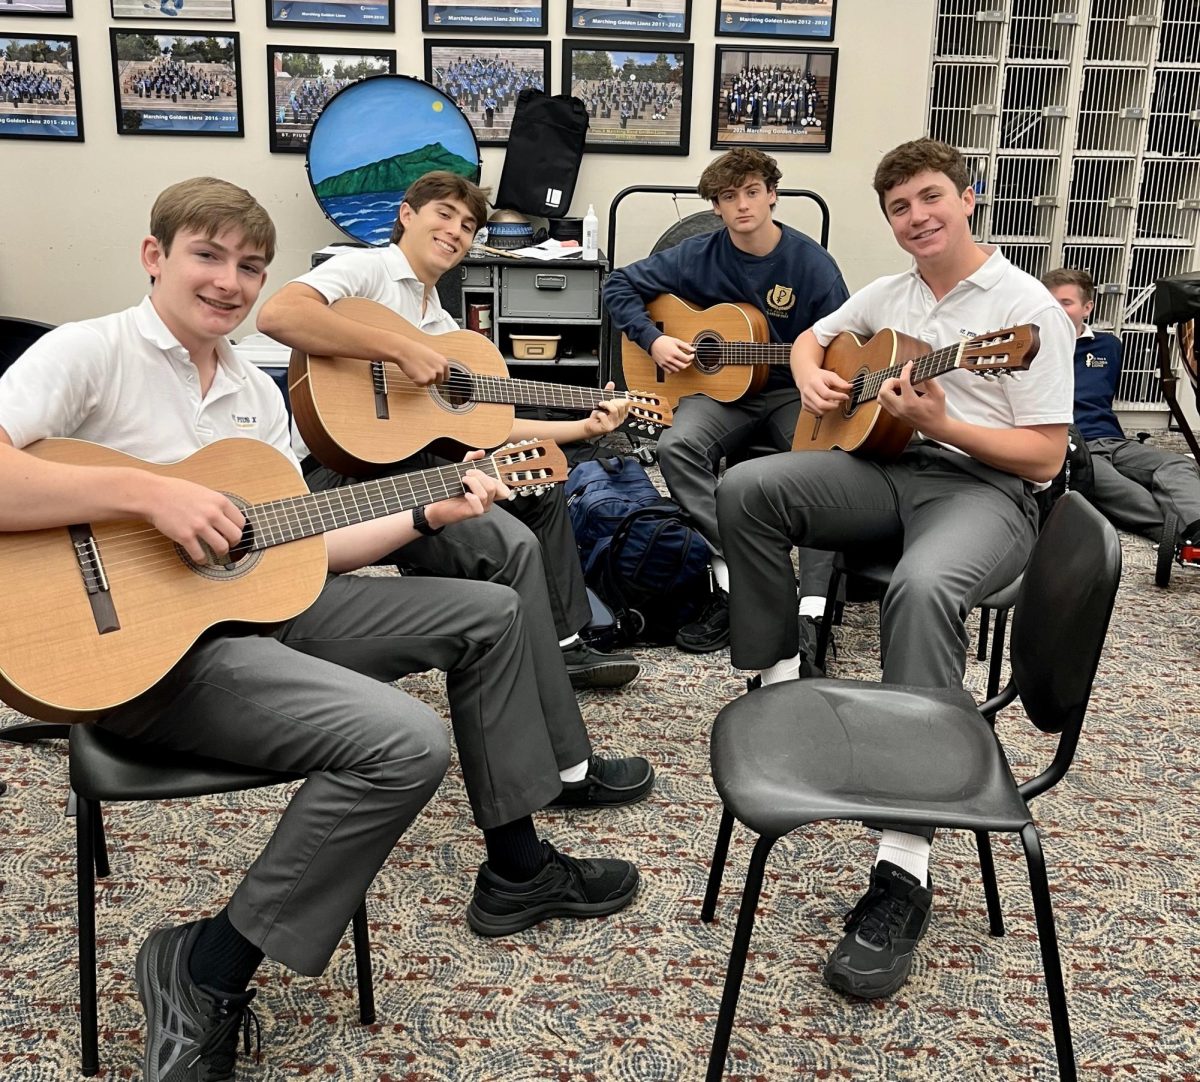 Students in Advanced Guitar prepare for Morning of the Arts on November 15. They will perform at their annual Christmas concert with the Band program on December 7. Theater and Chorus will have their show on December 6 followed by Dance on December 7. Staff photo.